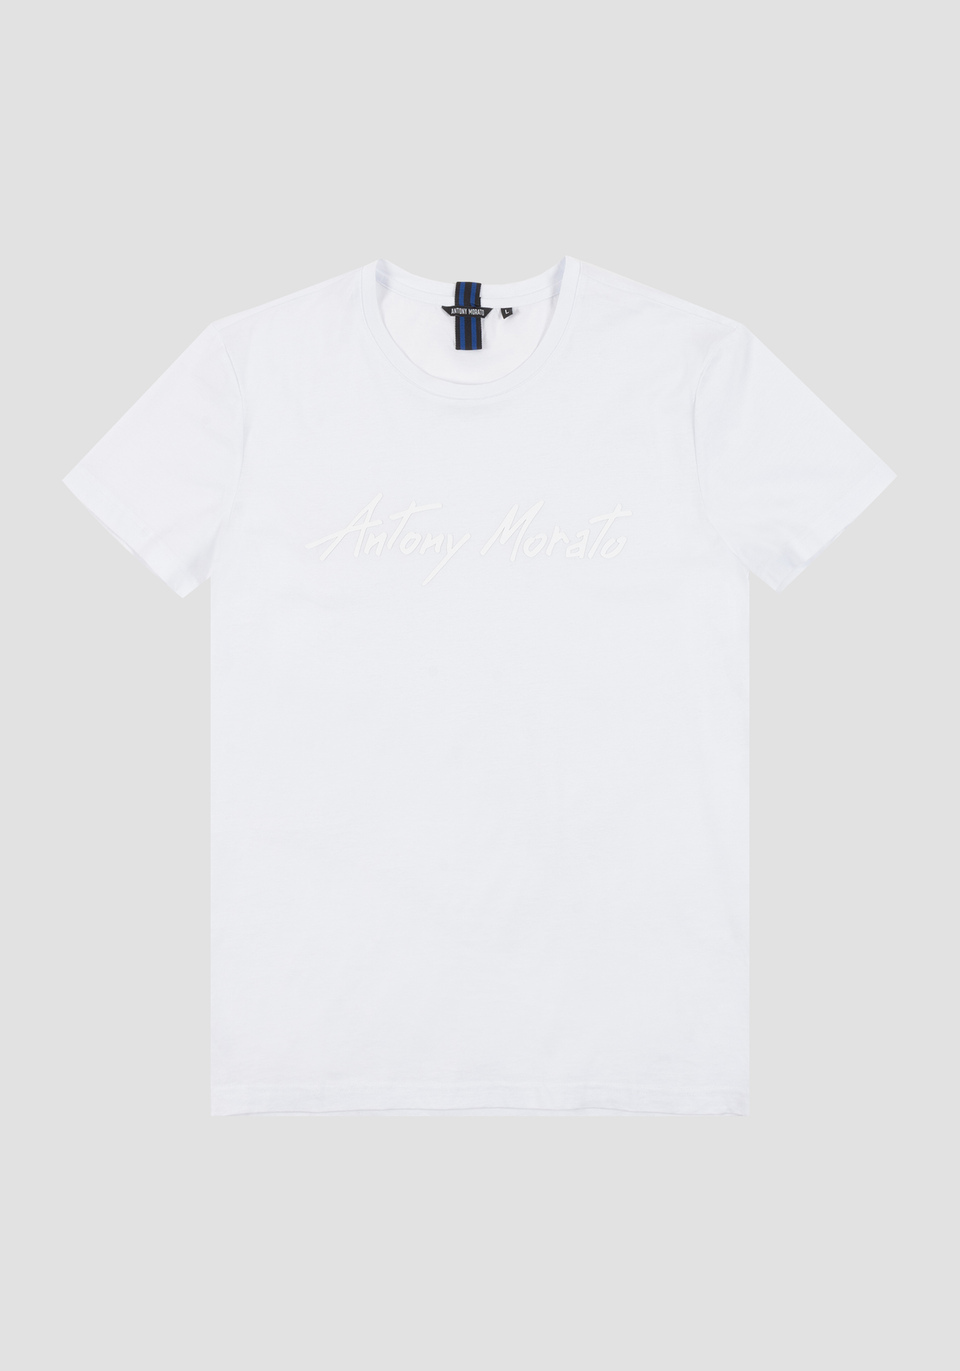 T-SHIRT MADE FROM SOFT COTTON WITH A RUBBER-COATED LOGO DETAIL - Antony Morato Online Shop